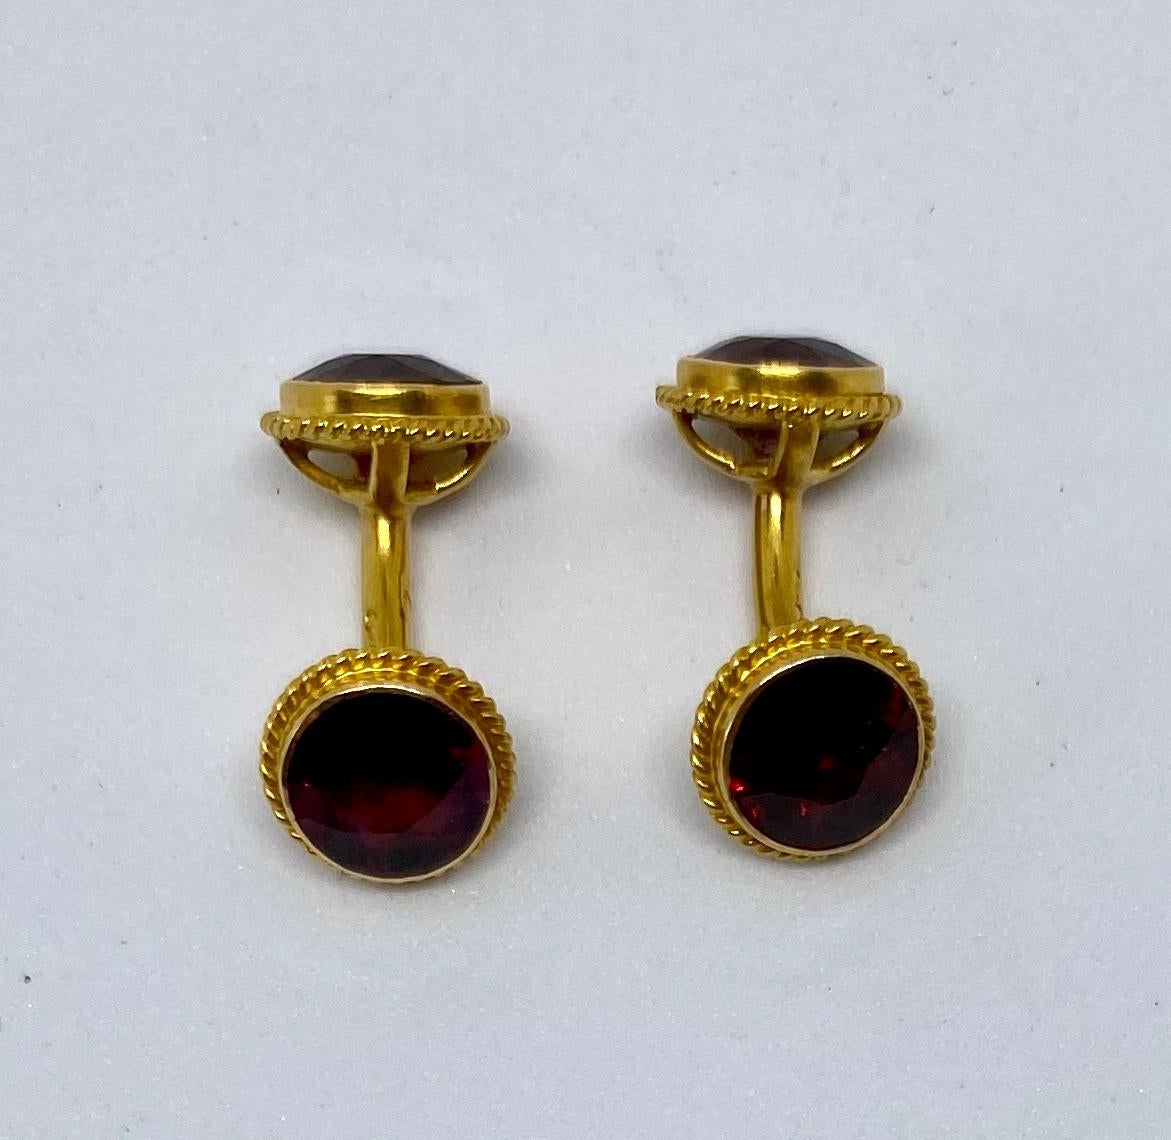 Toward the end of the 19th Century, two things happened in cufflink design: they became smaller, and they became more colorful. 

These beautiful and unusually well-preserved cufflinks are from that era. Made by Day, Clark & company of New York,